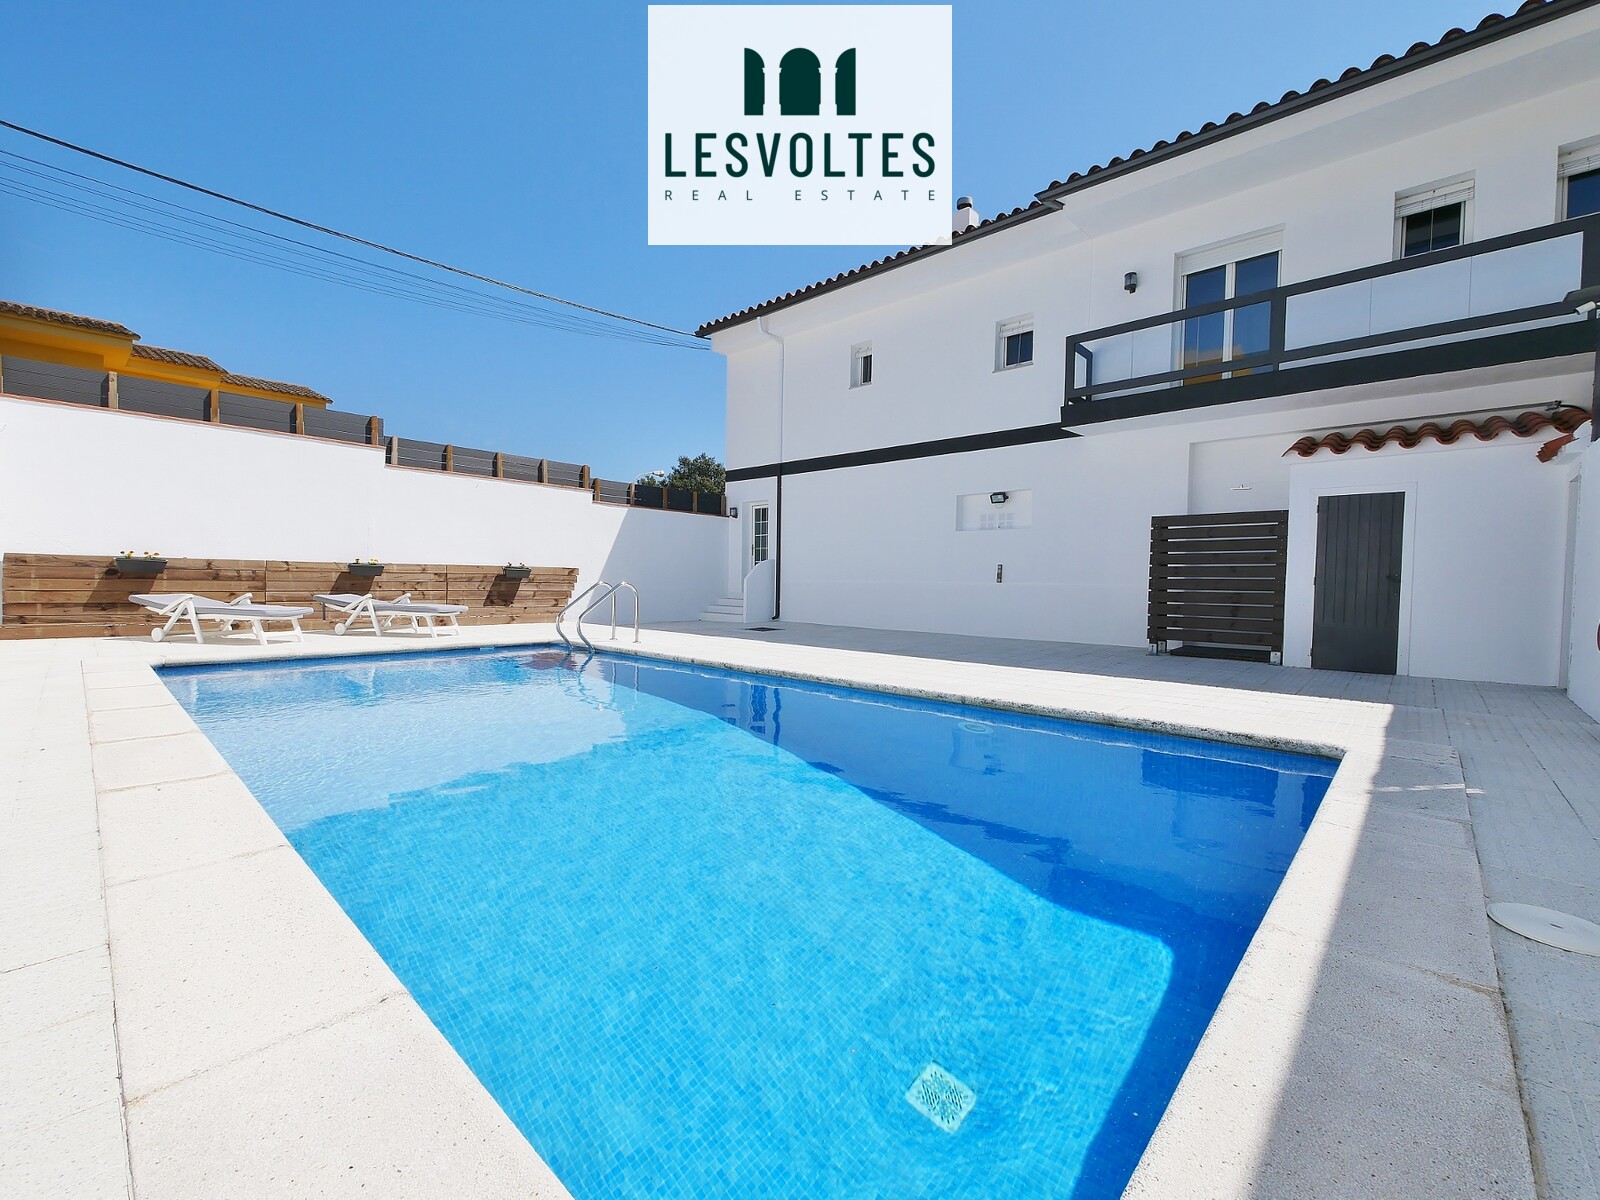 IMPECCABLE HOUSE WITH POOL FULLY FURNISHED AND EQUIPPED FOR RENT IN MON-TRAS.